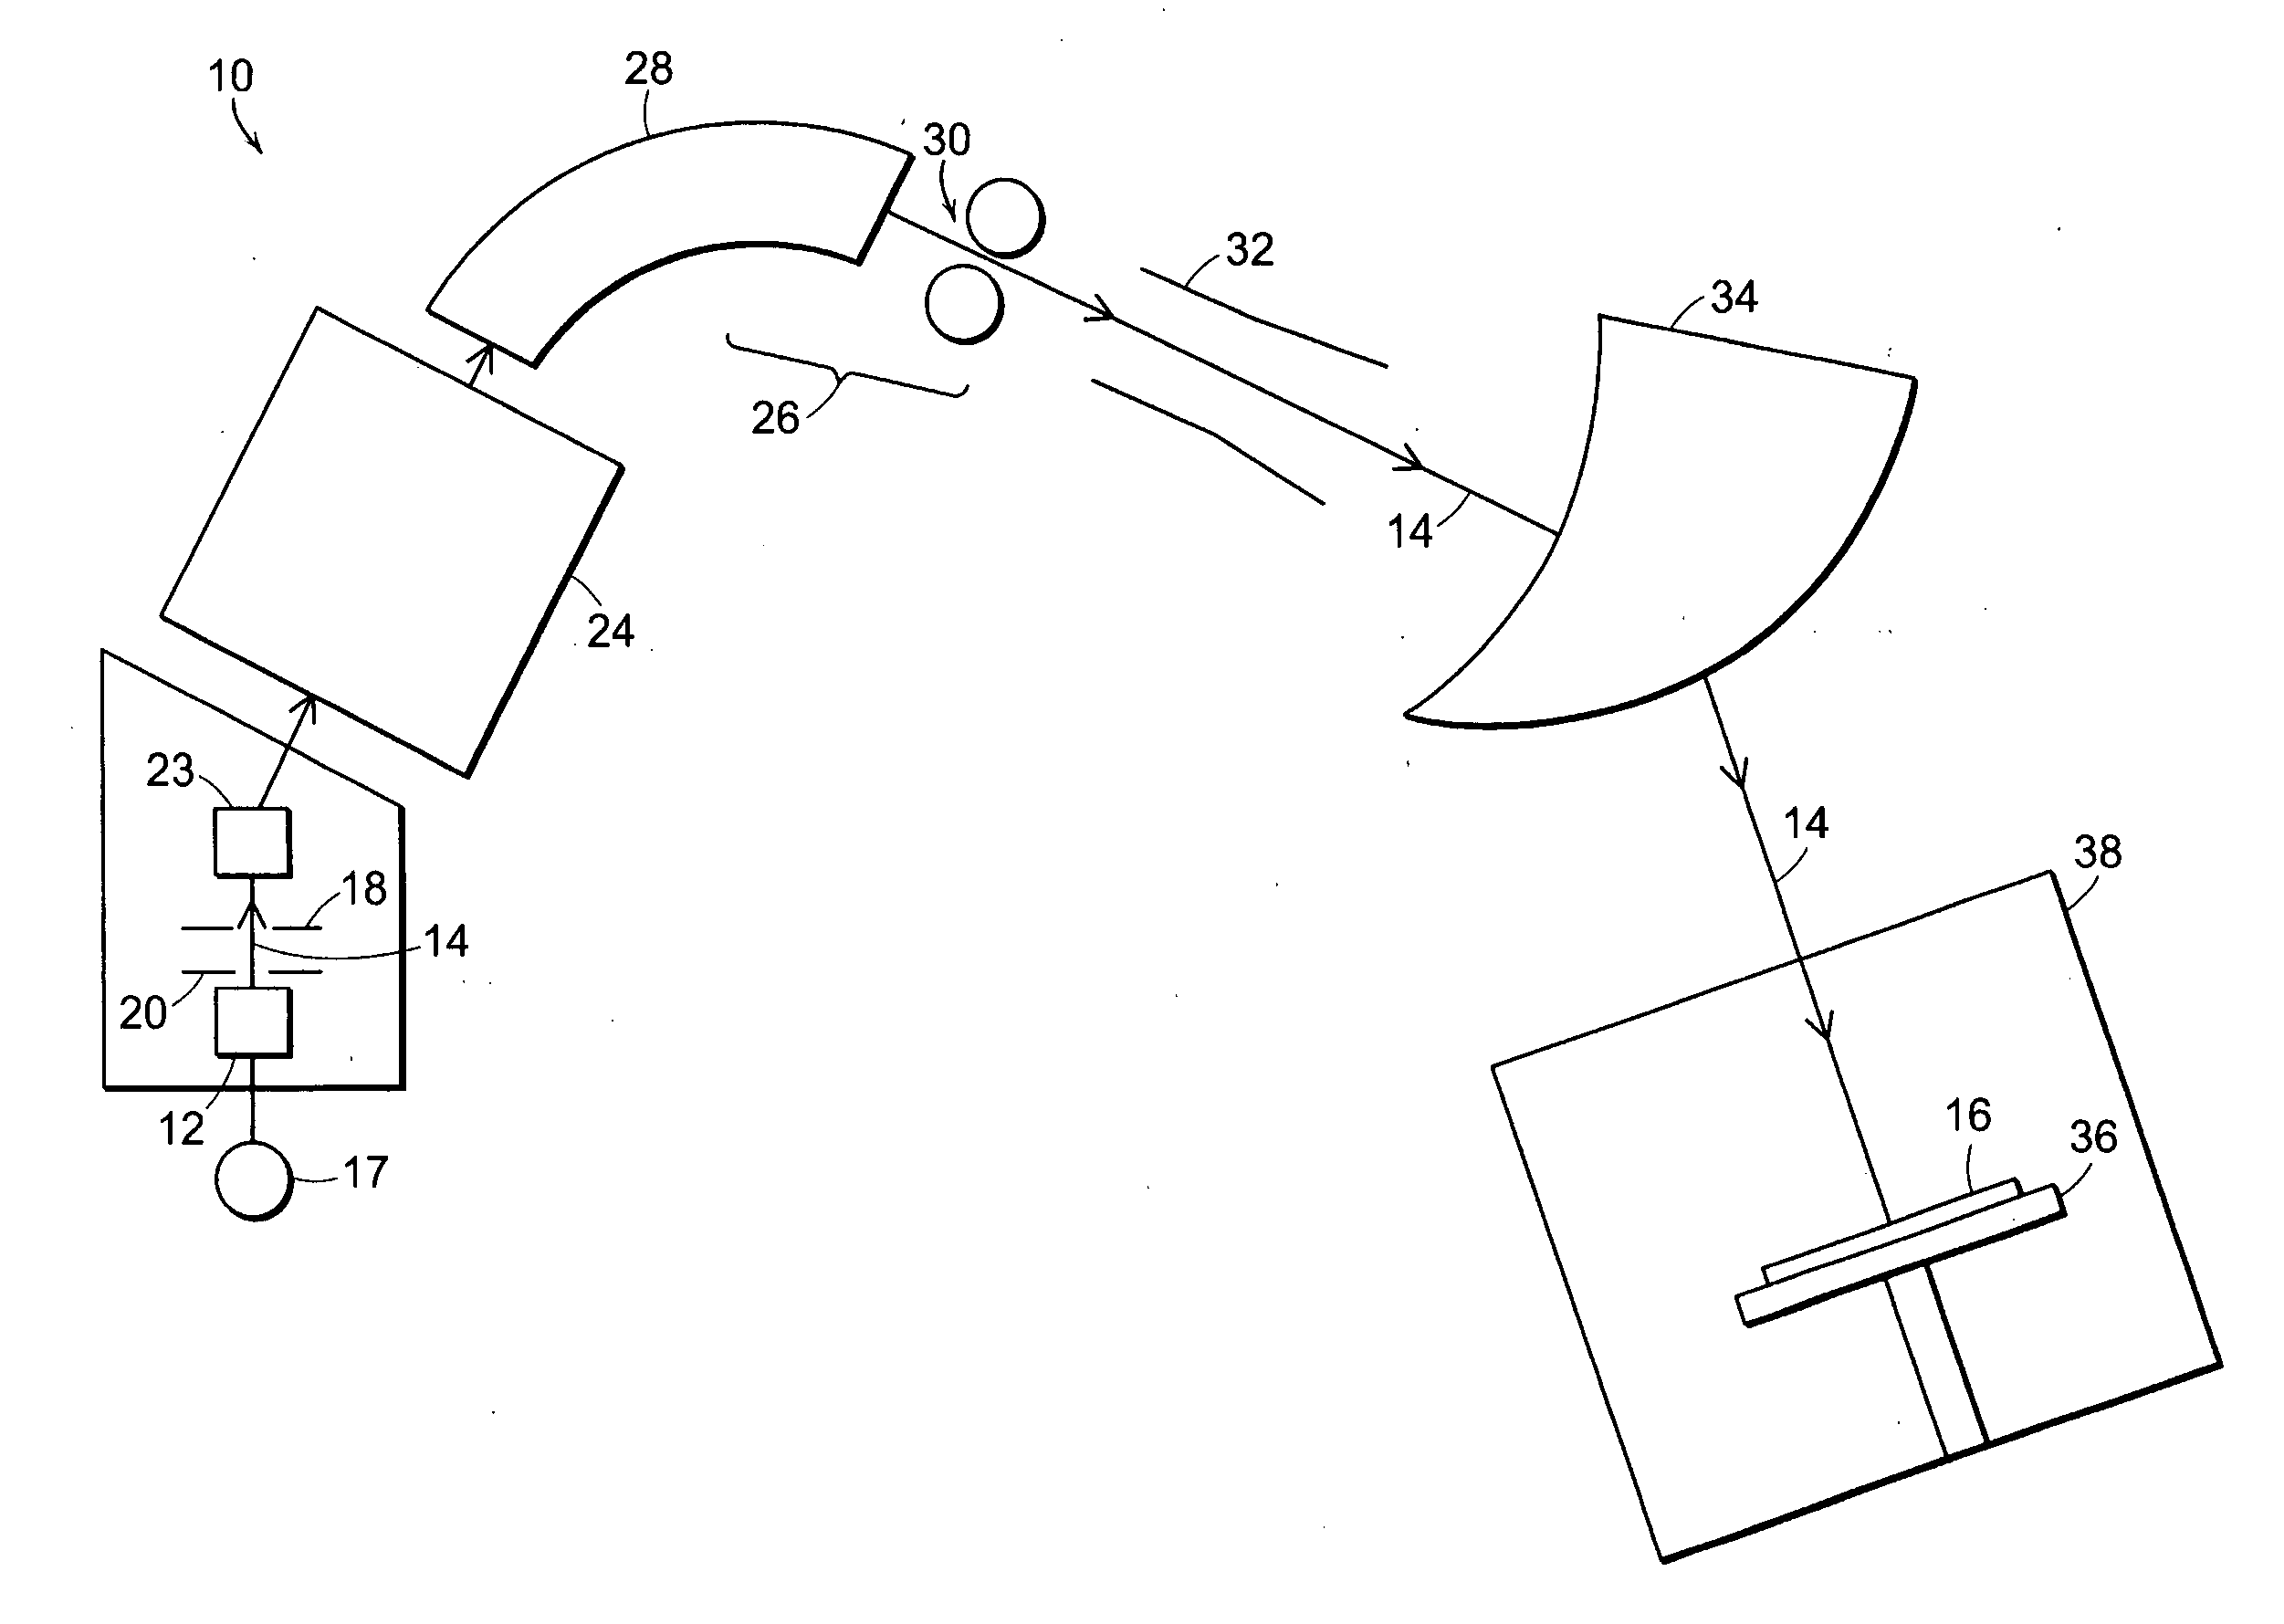 Methods of implanting ions and ion sources used for same